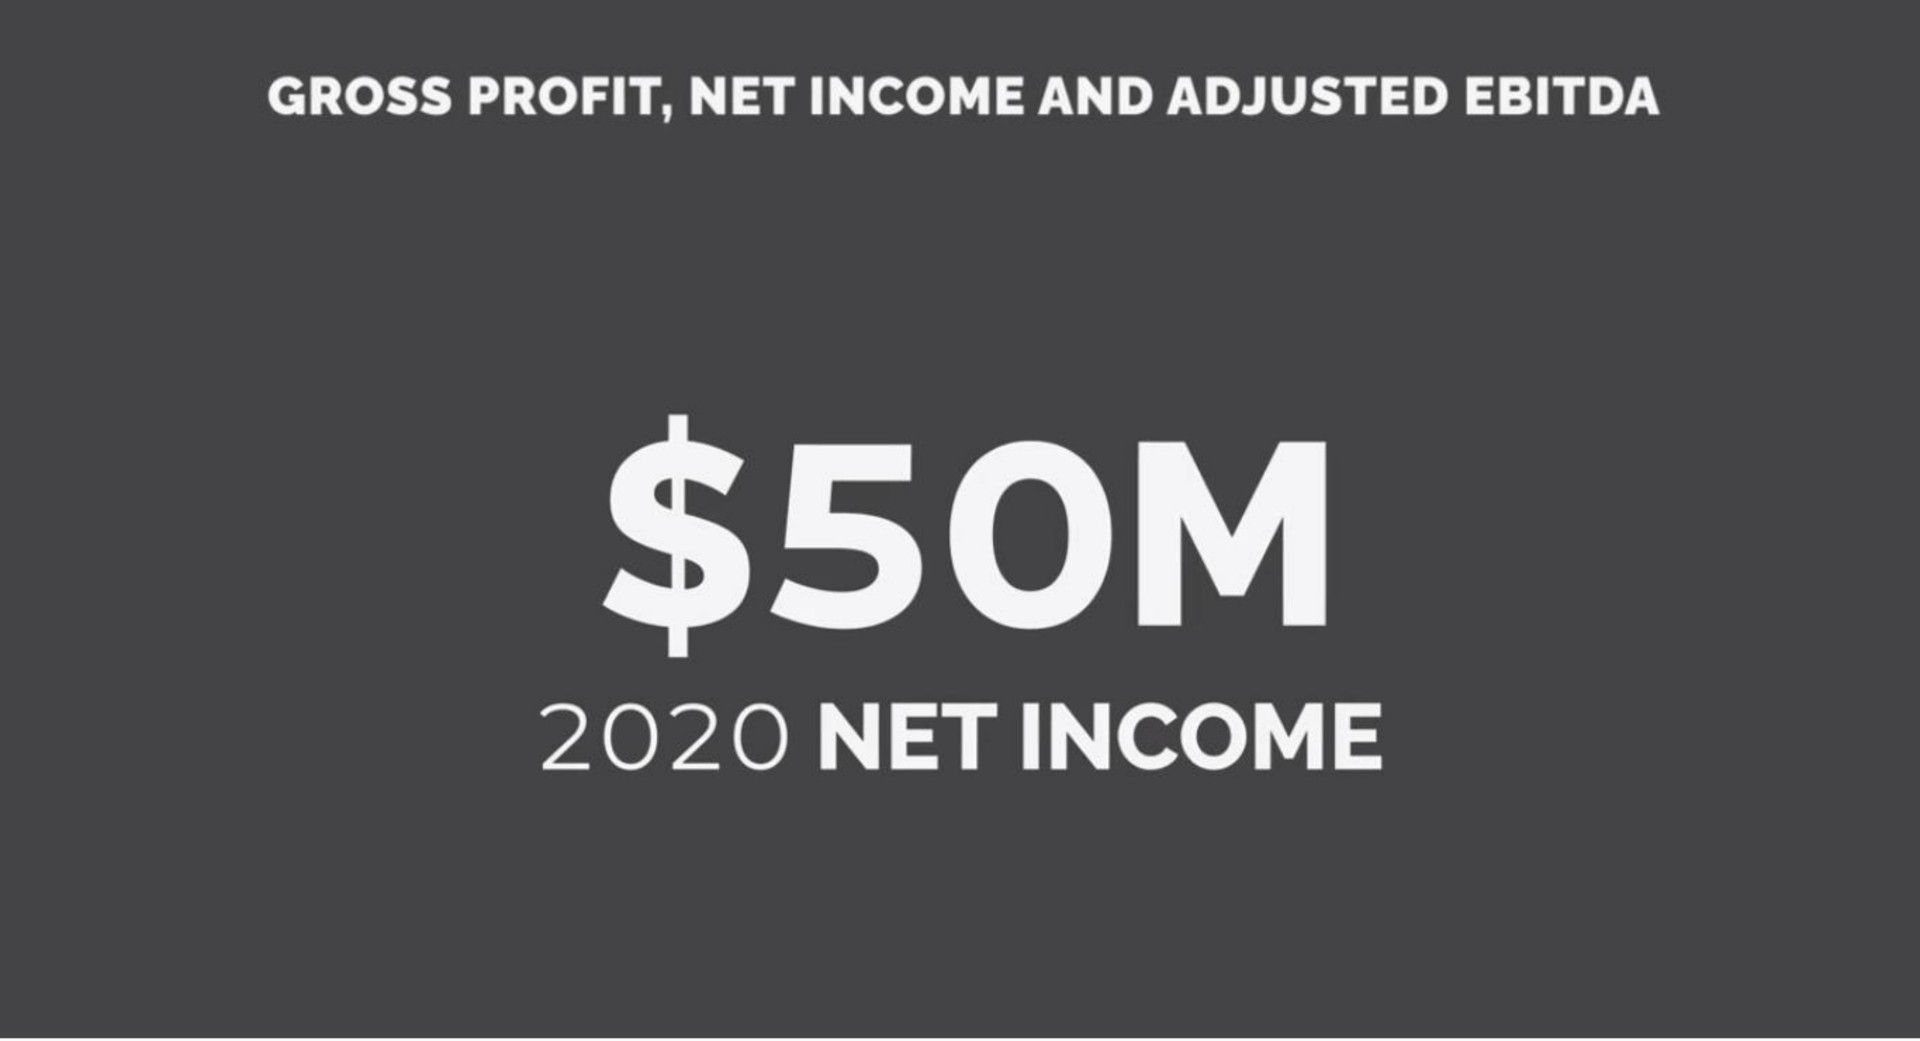 gross profit net income and adjusted net income | FIGS